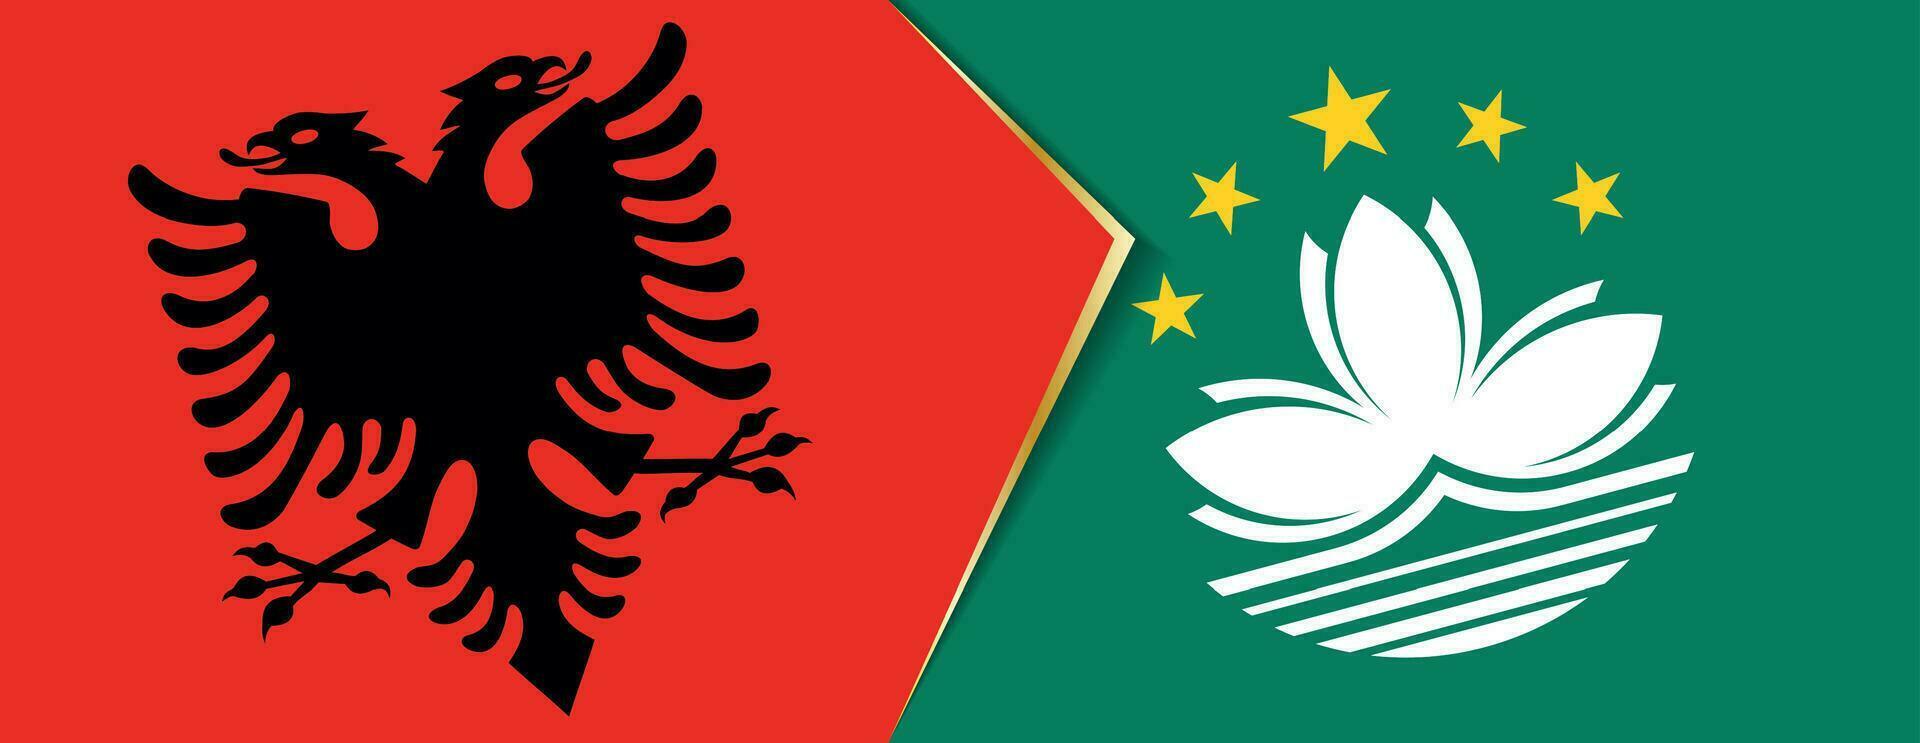 Albania and Macau flags, two vector flags.